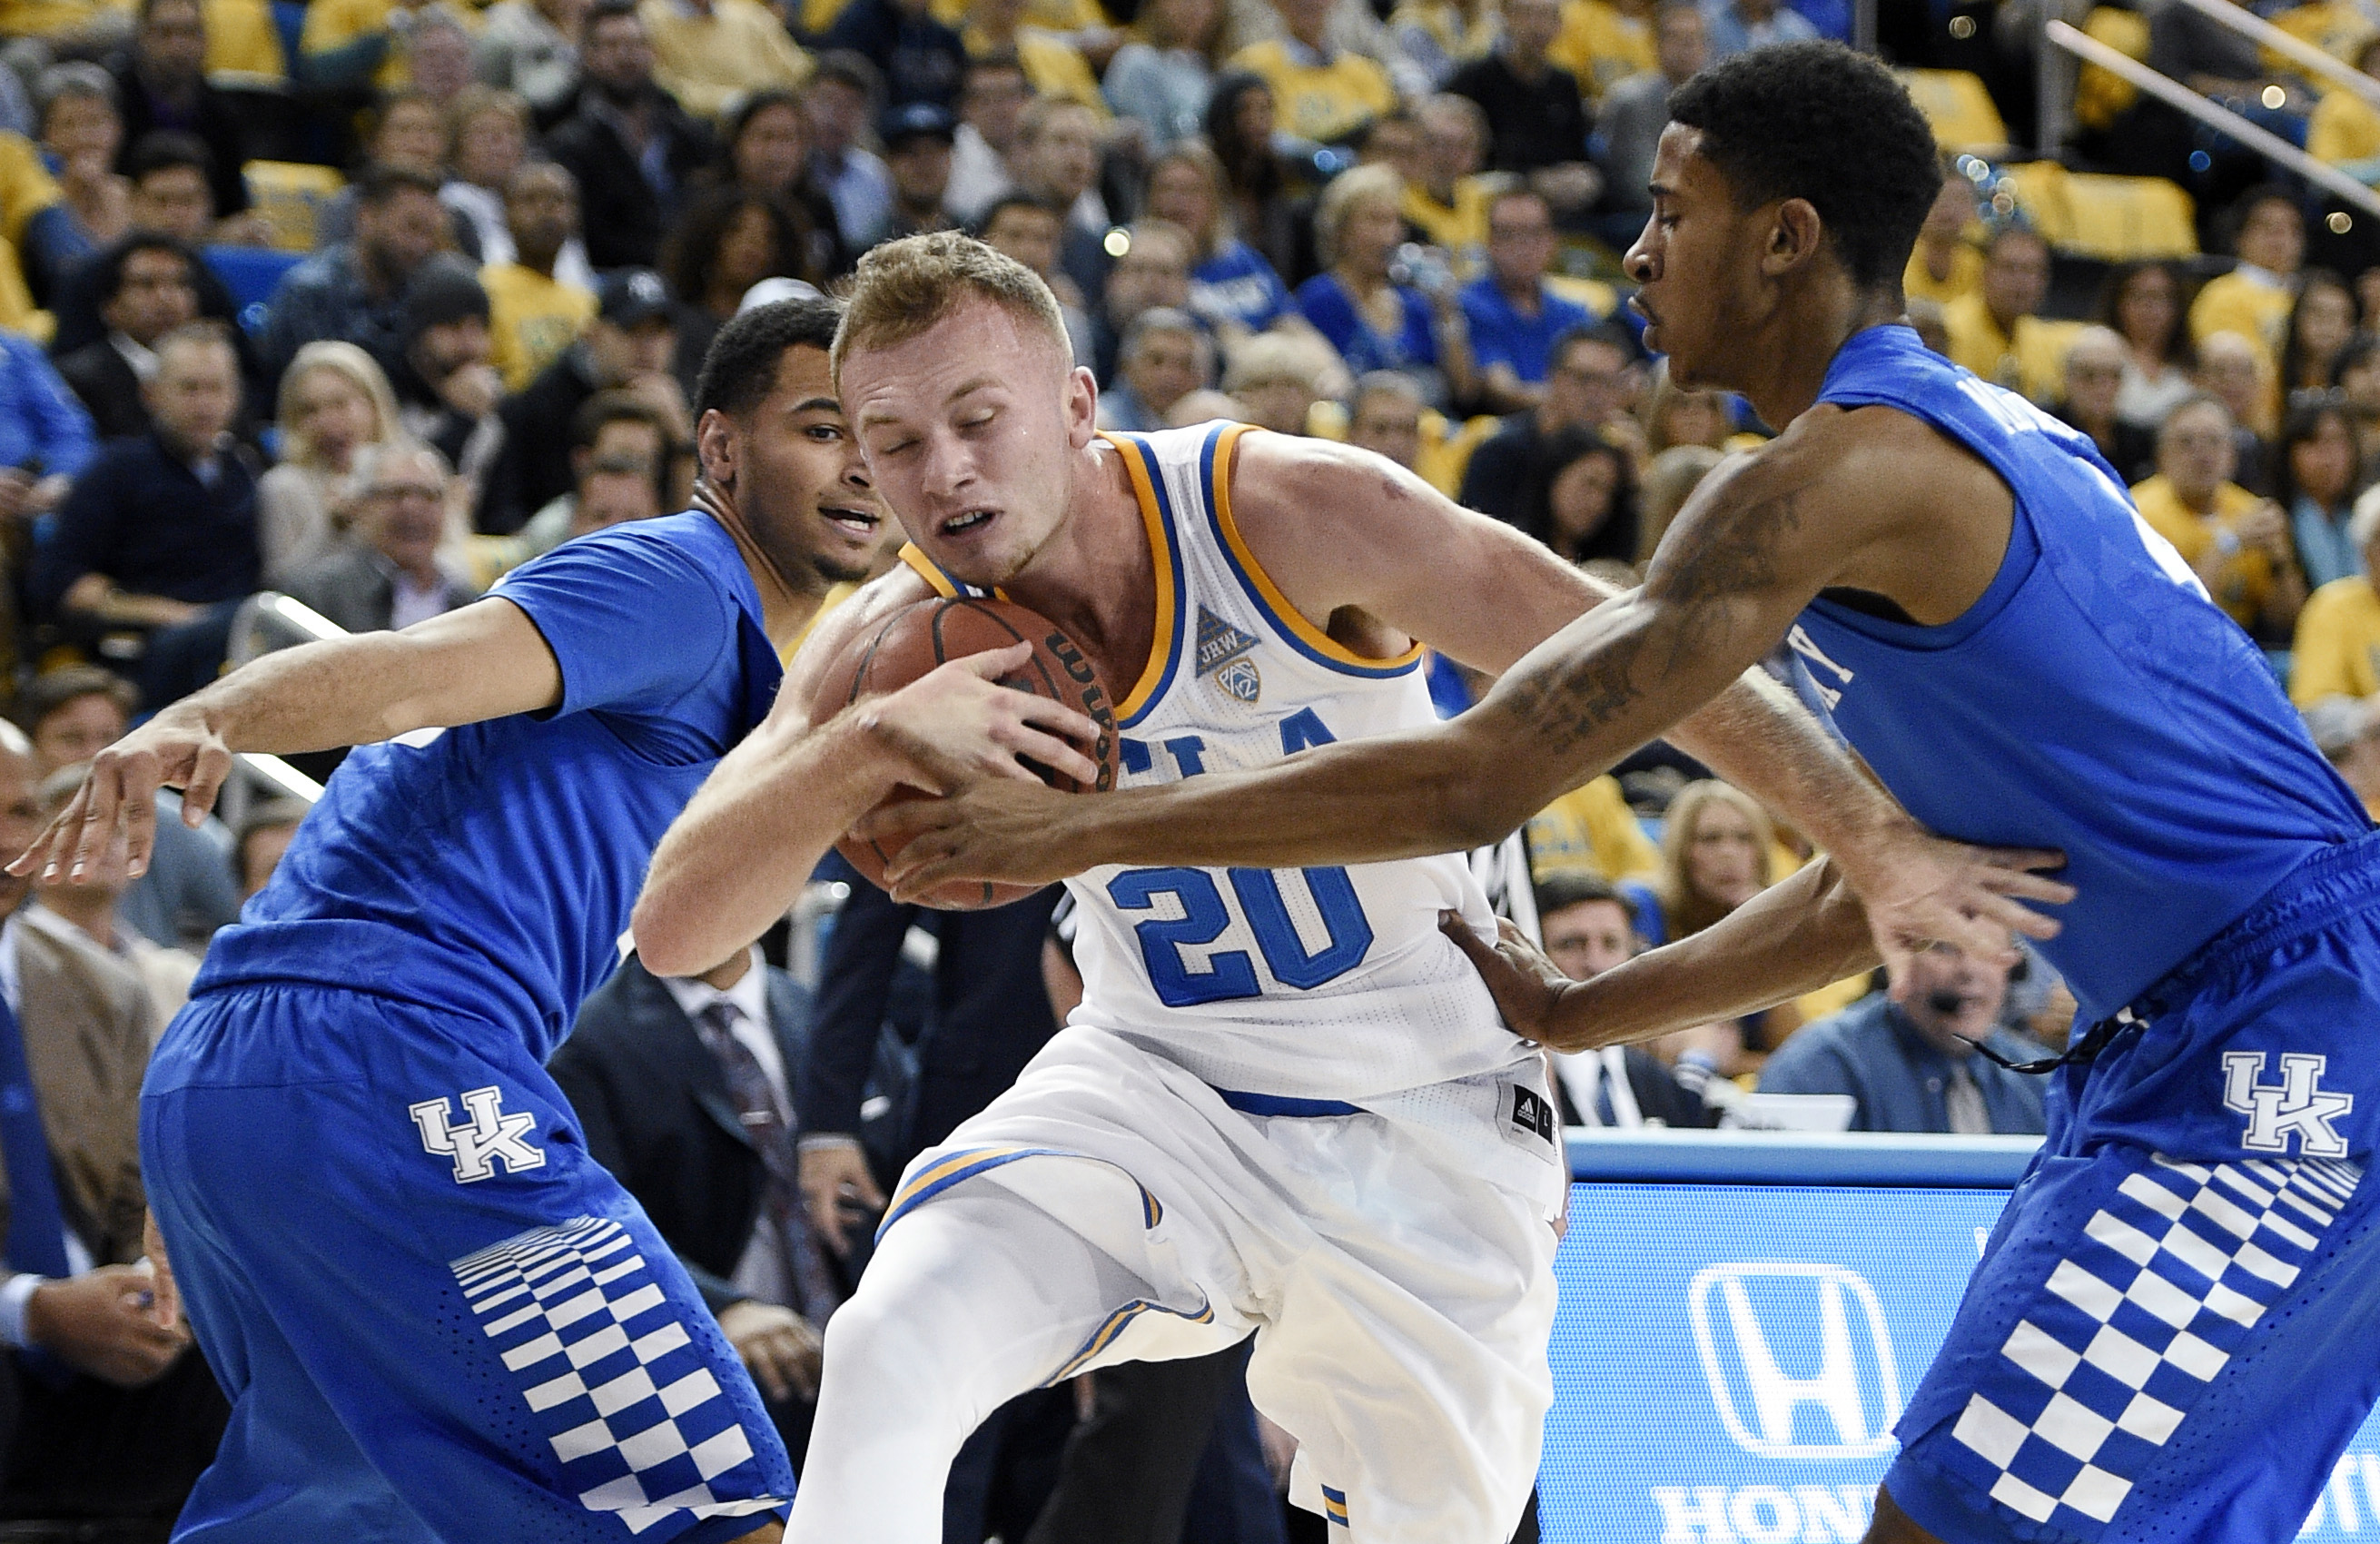 UCLA guard Bryce Alford, center, attempts to move the ball past Kentucky guard Charles Matthews, right, as Jamal Murray, left, helps defend during the first half of an NCAA college basketball game in Los Angeles, Thursday, Dec. 3, 2015. (AP Photo/Kelvin Kuo)